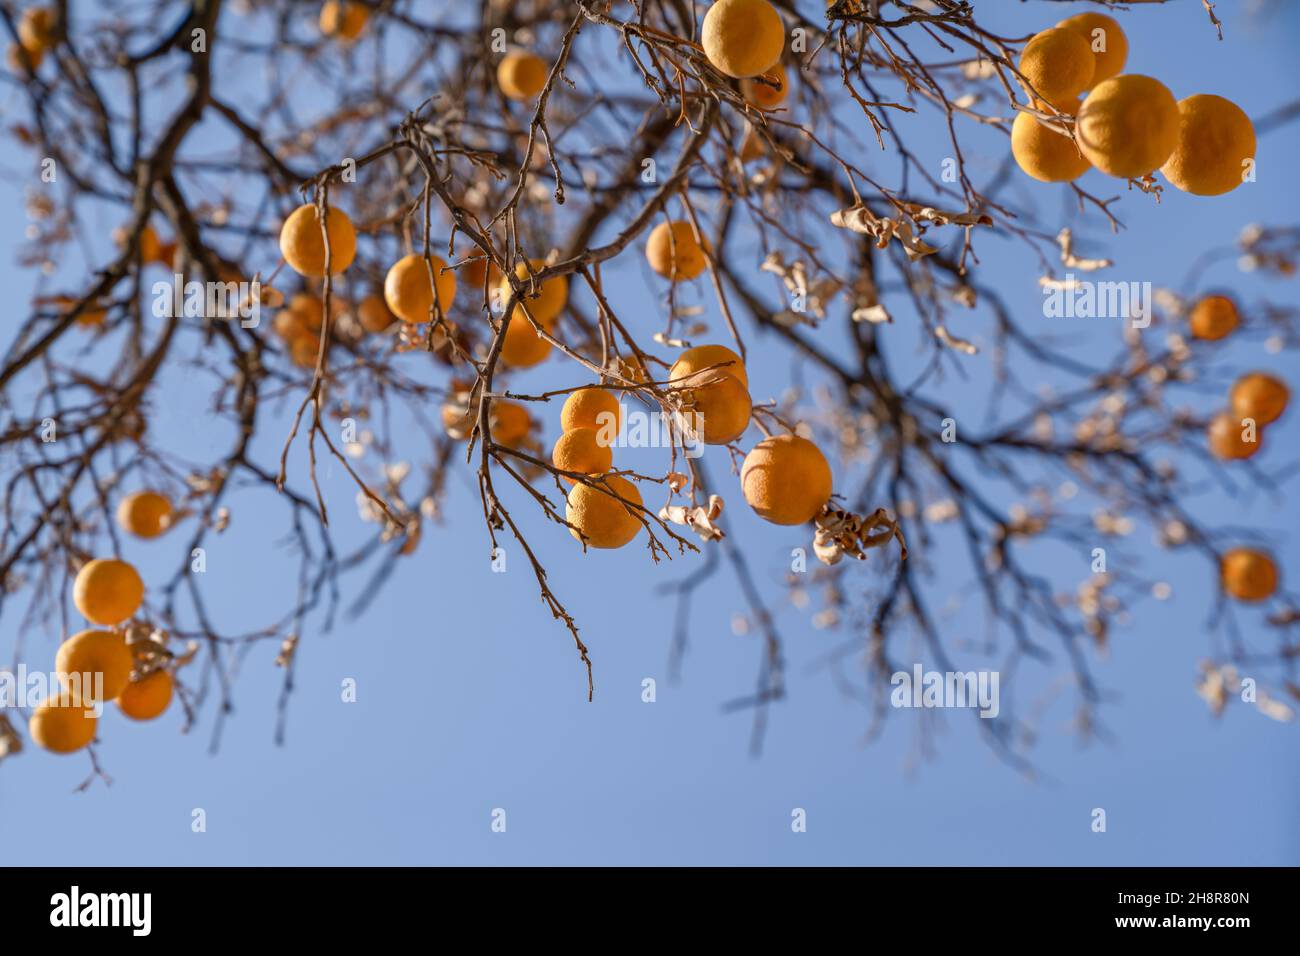 Concept of autumn, health and ecology. Oranges hang on dry branches without leaves against a blue sky.  Stock Photo